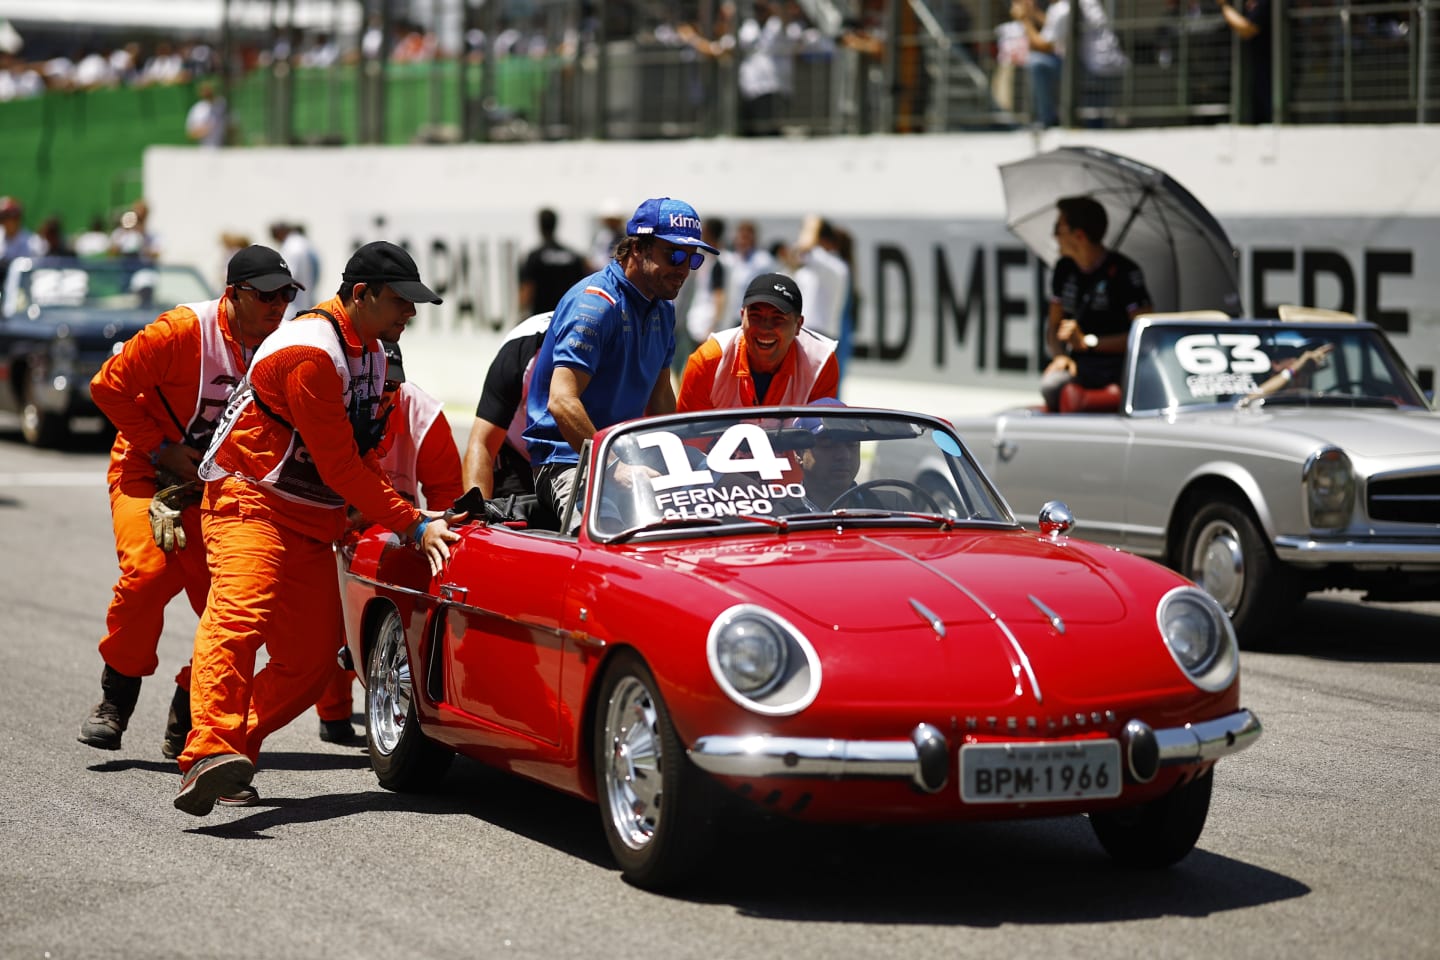 SAO PAULO, BRAZIL - NOVEMBER 13: Track marshals help Fernando Alonso of Spain and Alpine F1 as his car stops on the drivers parade prior to the F1 Grand Prix of Brazil at Autodromo Jose Carlos Pace on November 13, 2022 in Sao Paulo, Brazil. (Photo by Chris Graythen/Getty Images)